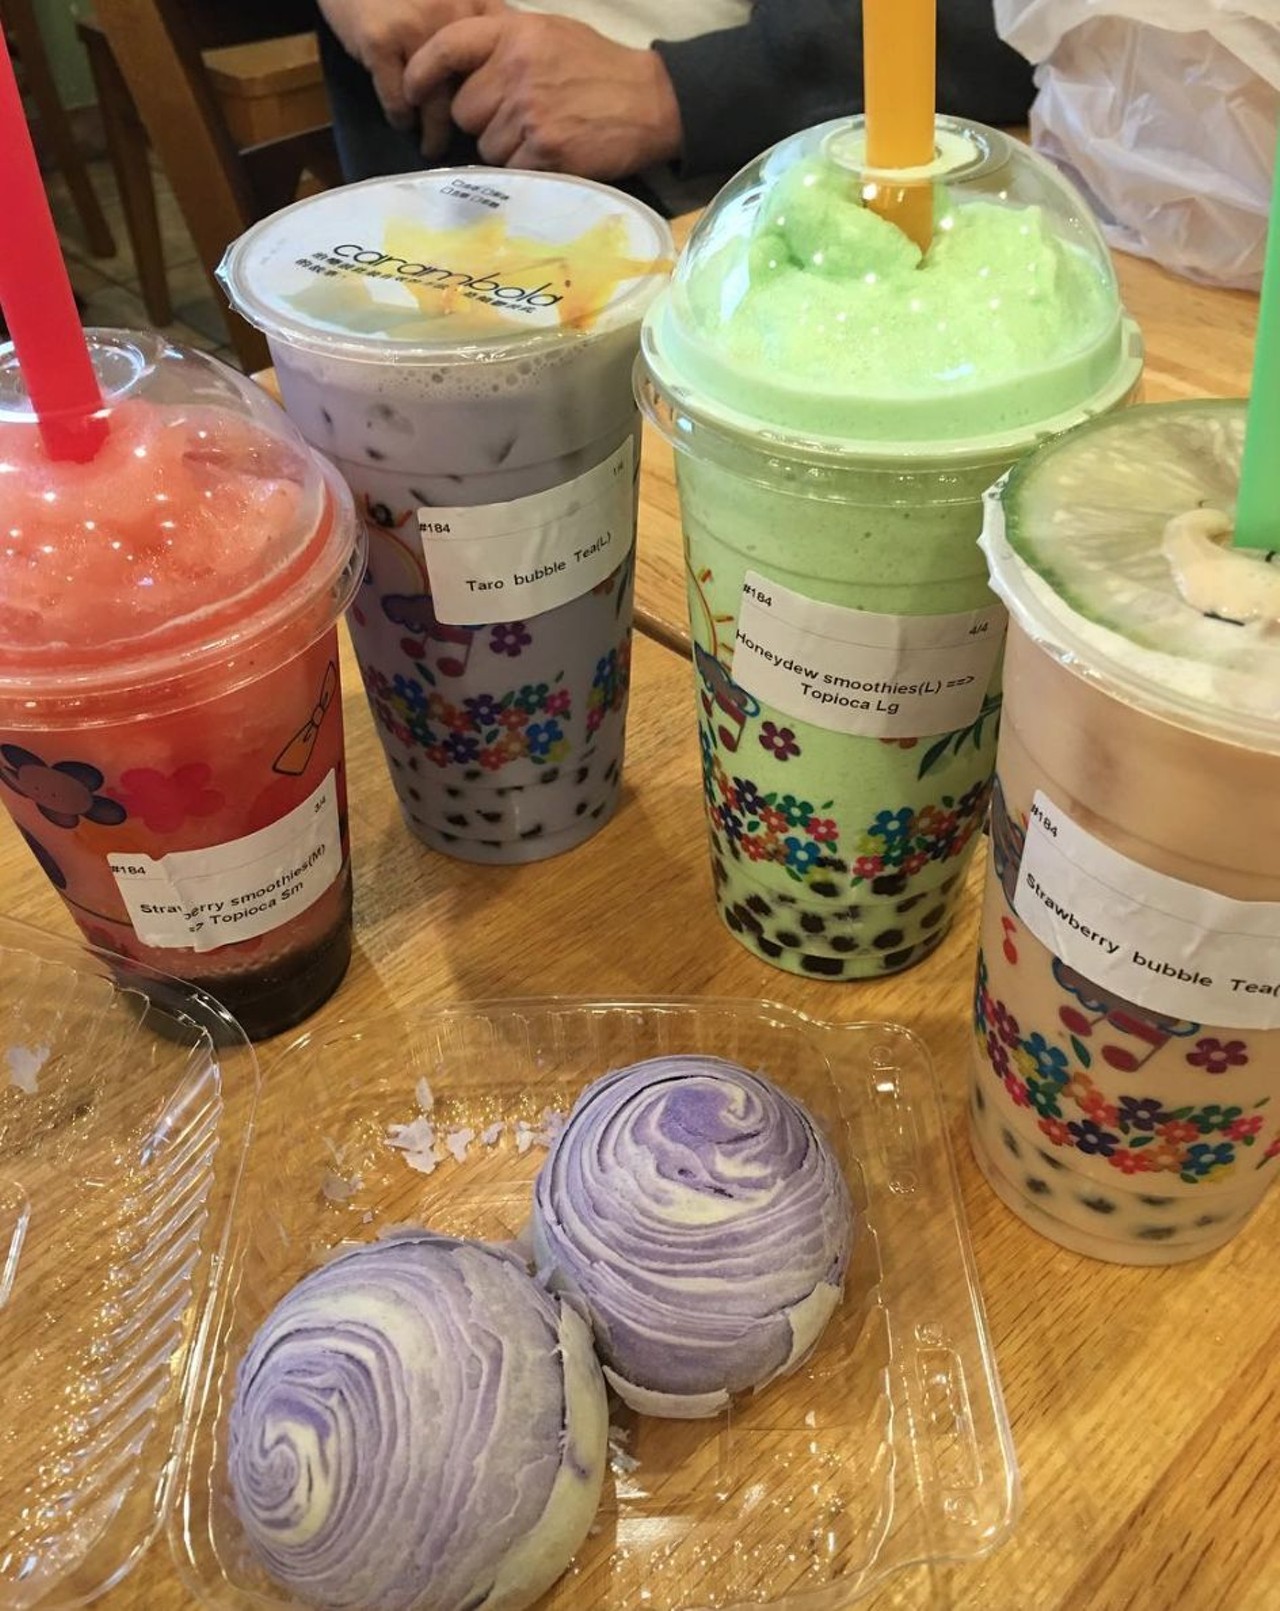  Koko Bakery
3710 Payne Ave., 216-881-7600
This Asian-style bakery features tasty shaved ice smoothies that blend ice with fruity flavors, like honeydew and guava.
Photo via veroniquesworld/Instagram